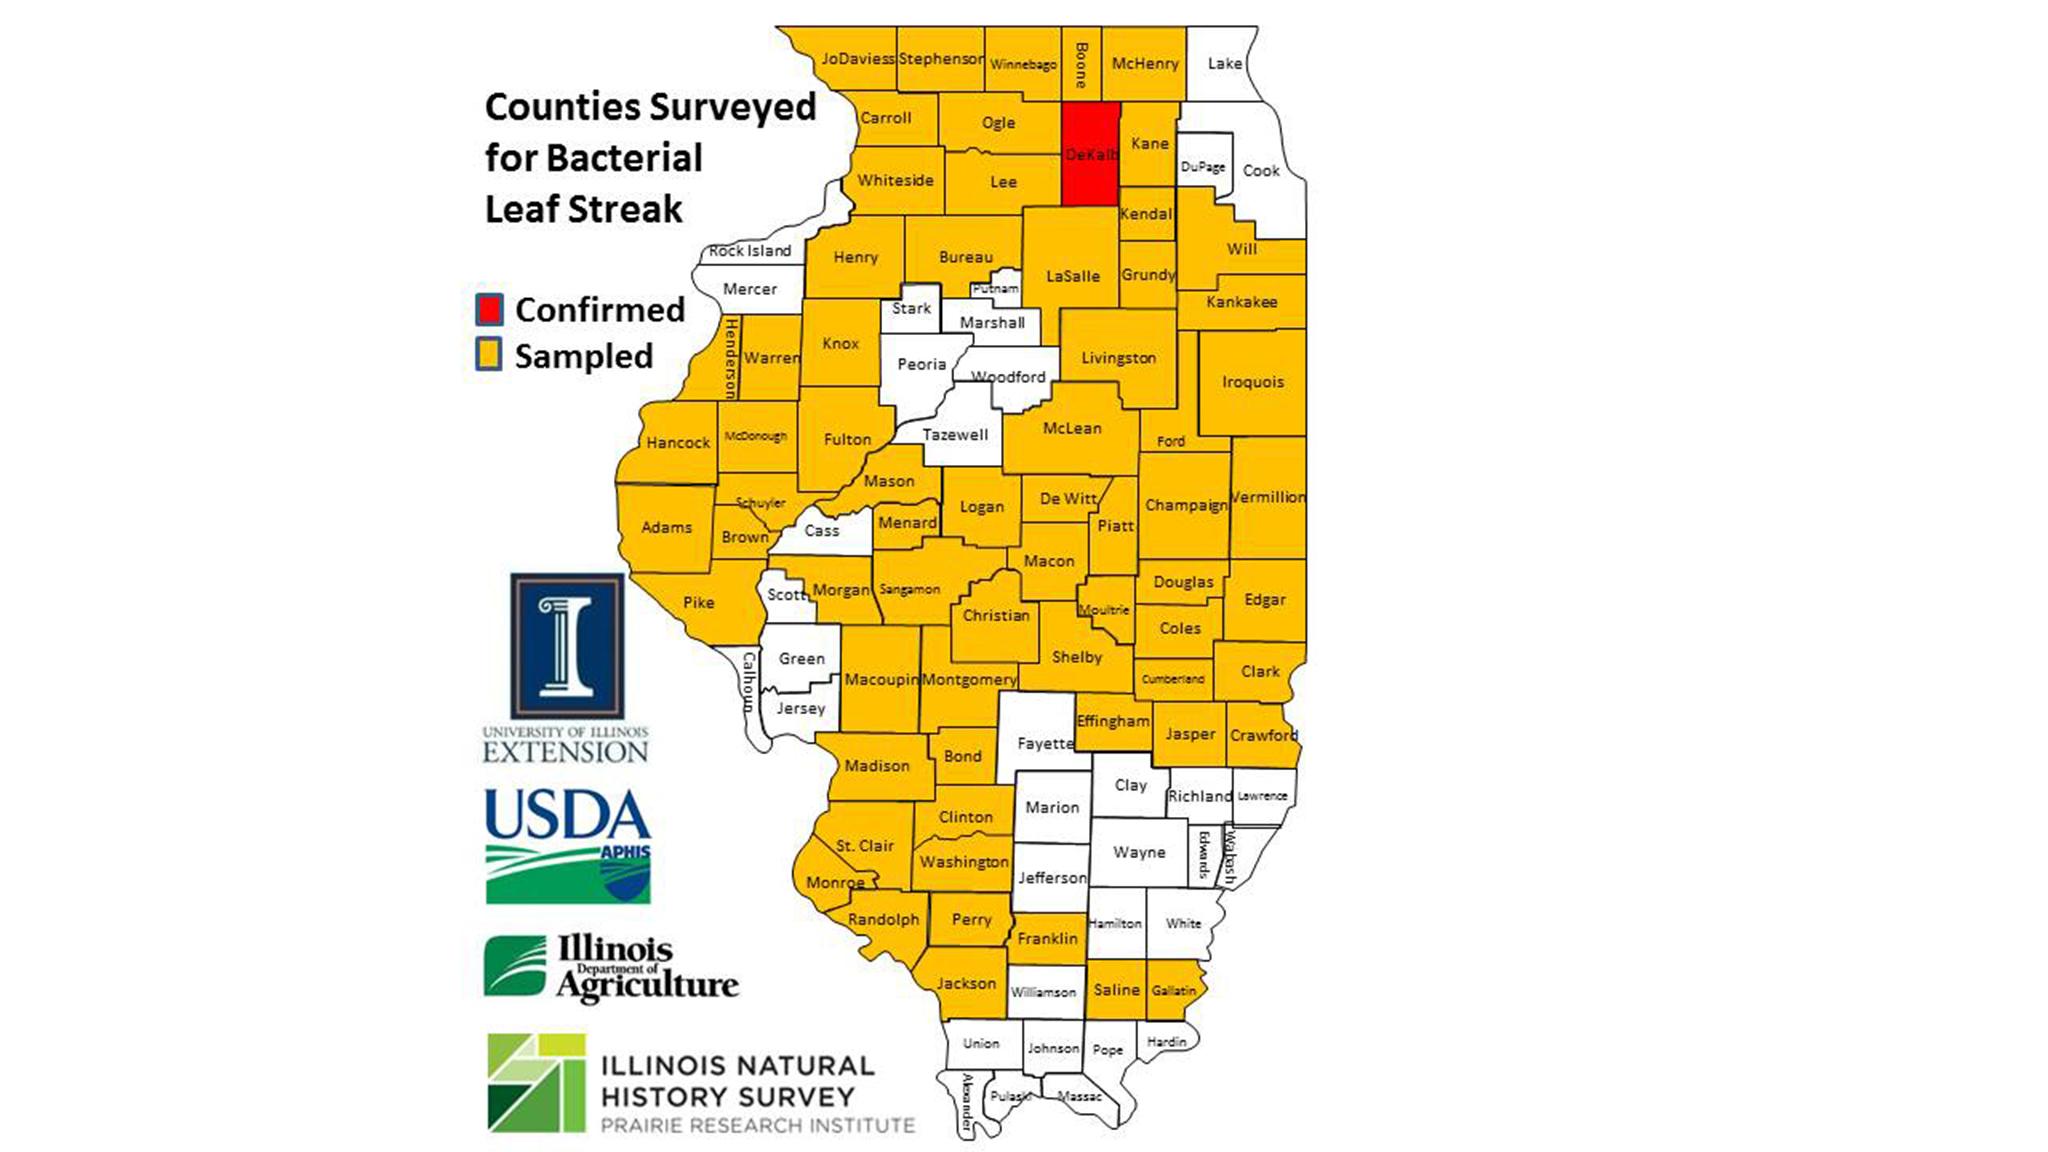 Cook County was not one of the 66 Illinois counties surveyed for bacterial leaf streak.